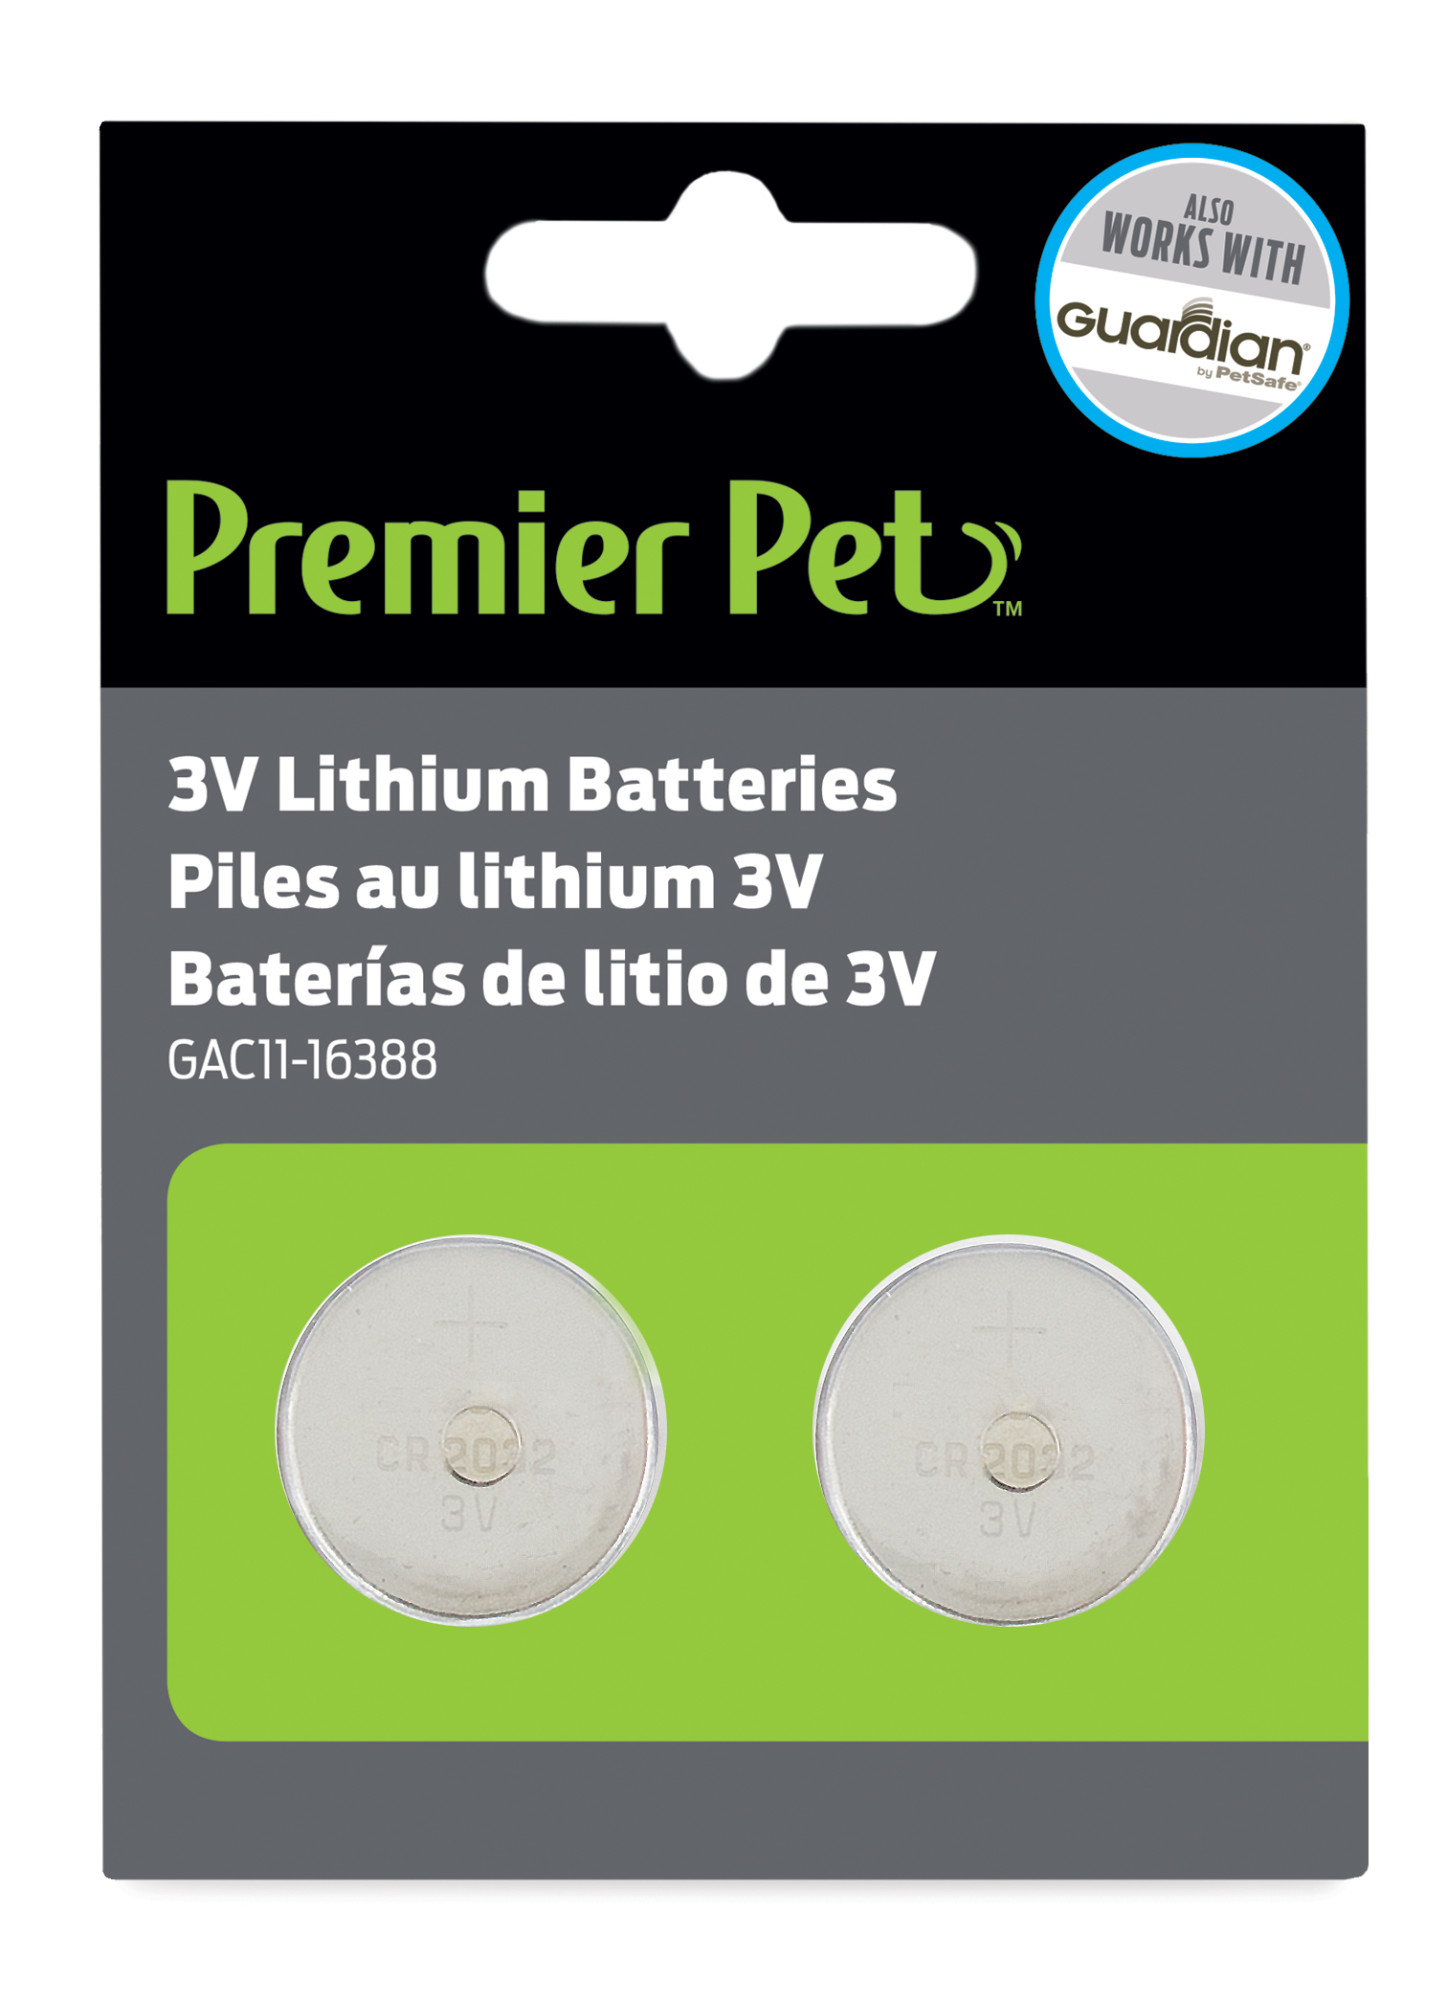 Premier Pet 3V Lithium Batteries - Replacement Bark Collar Batteries  - Pack of 2 - image 3 of 4